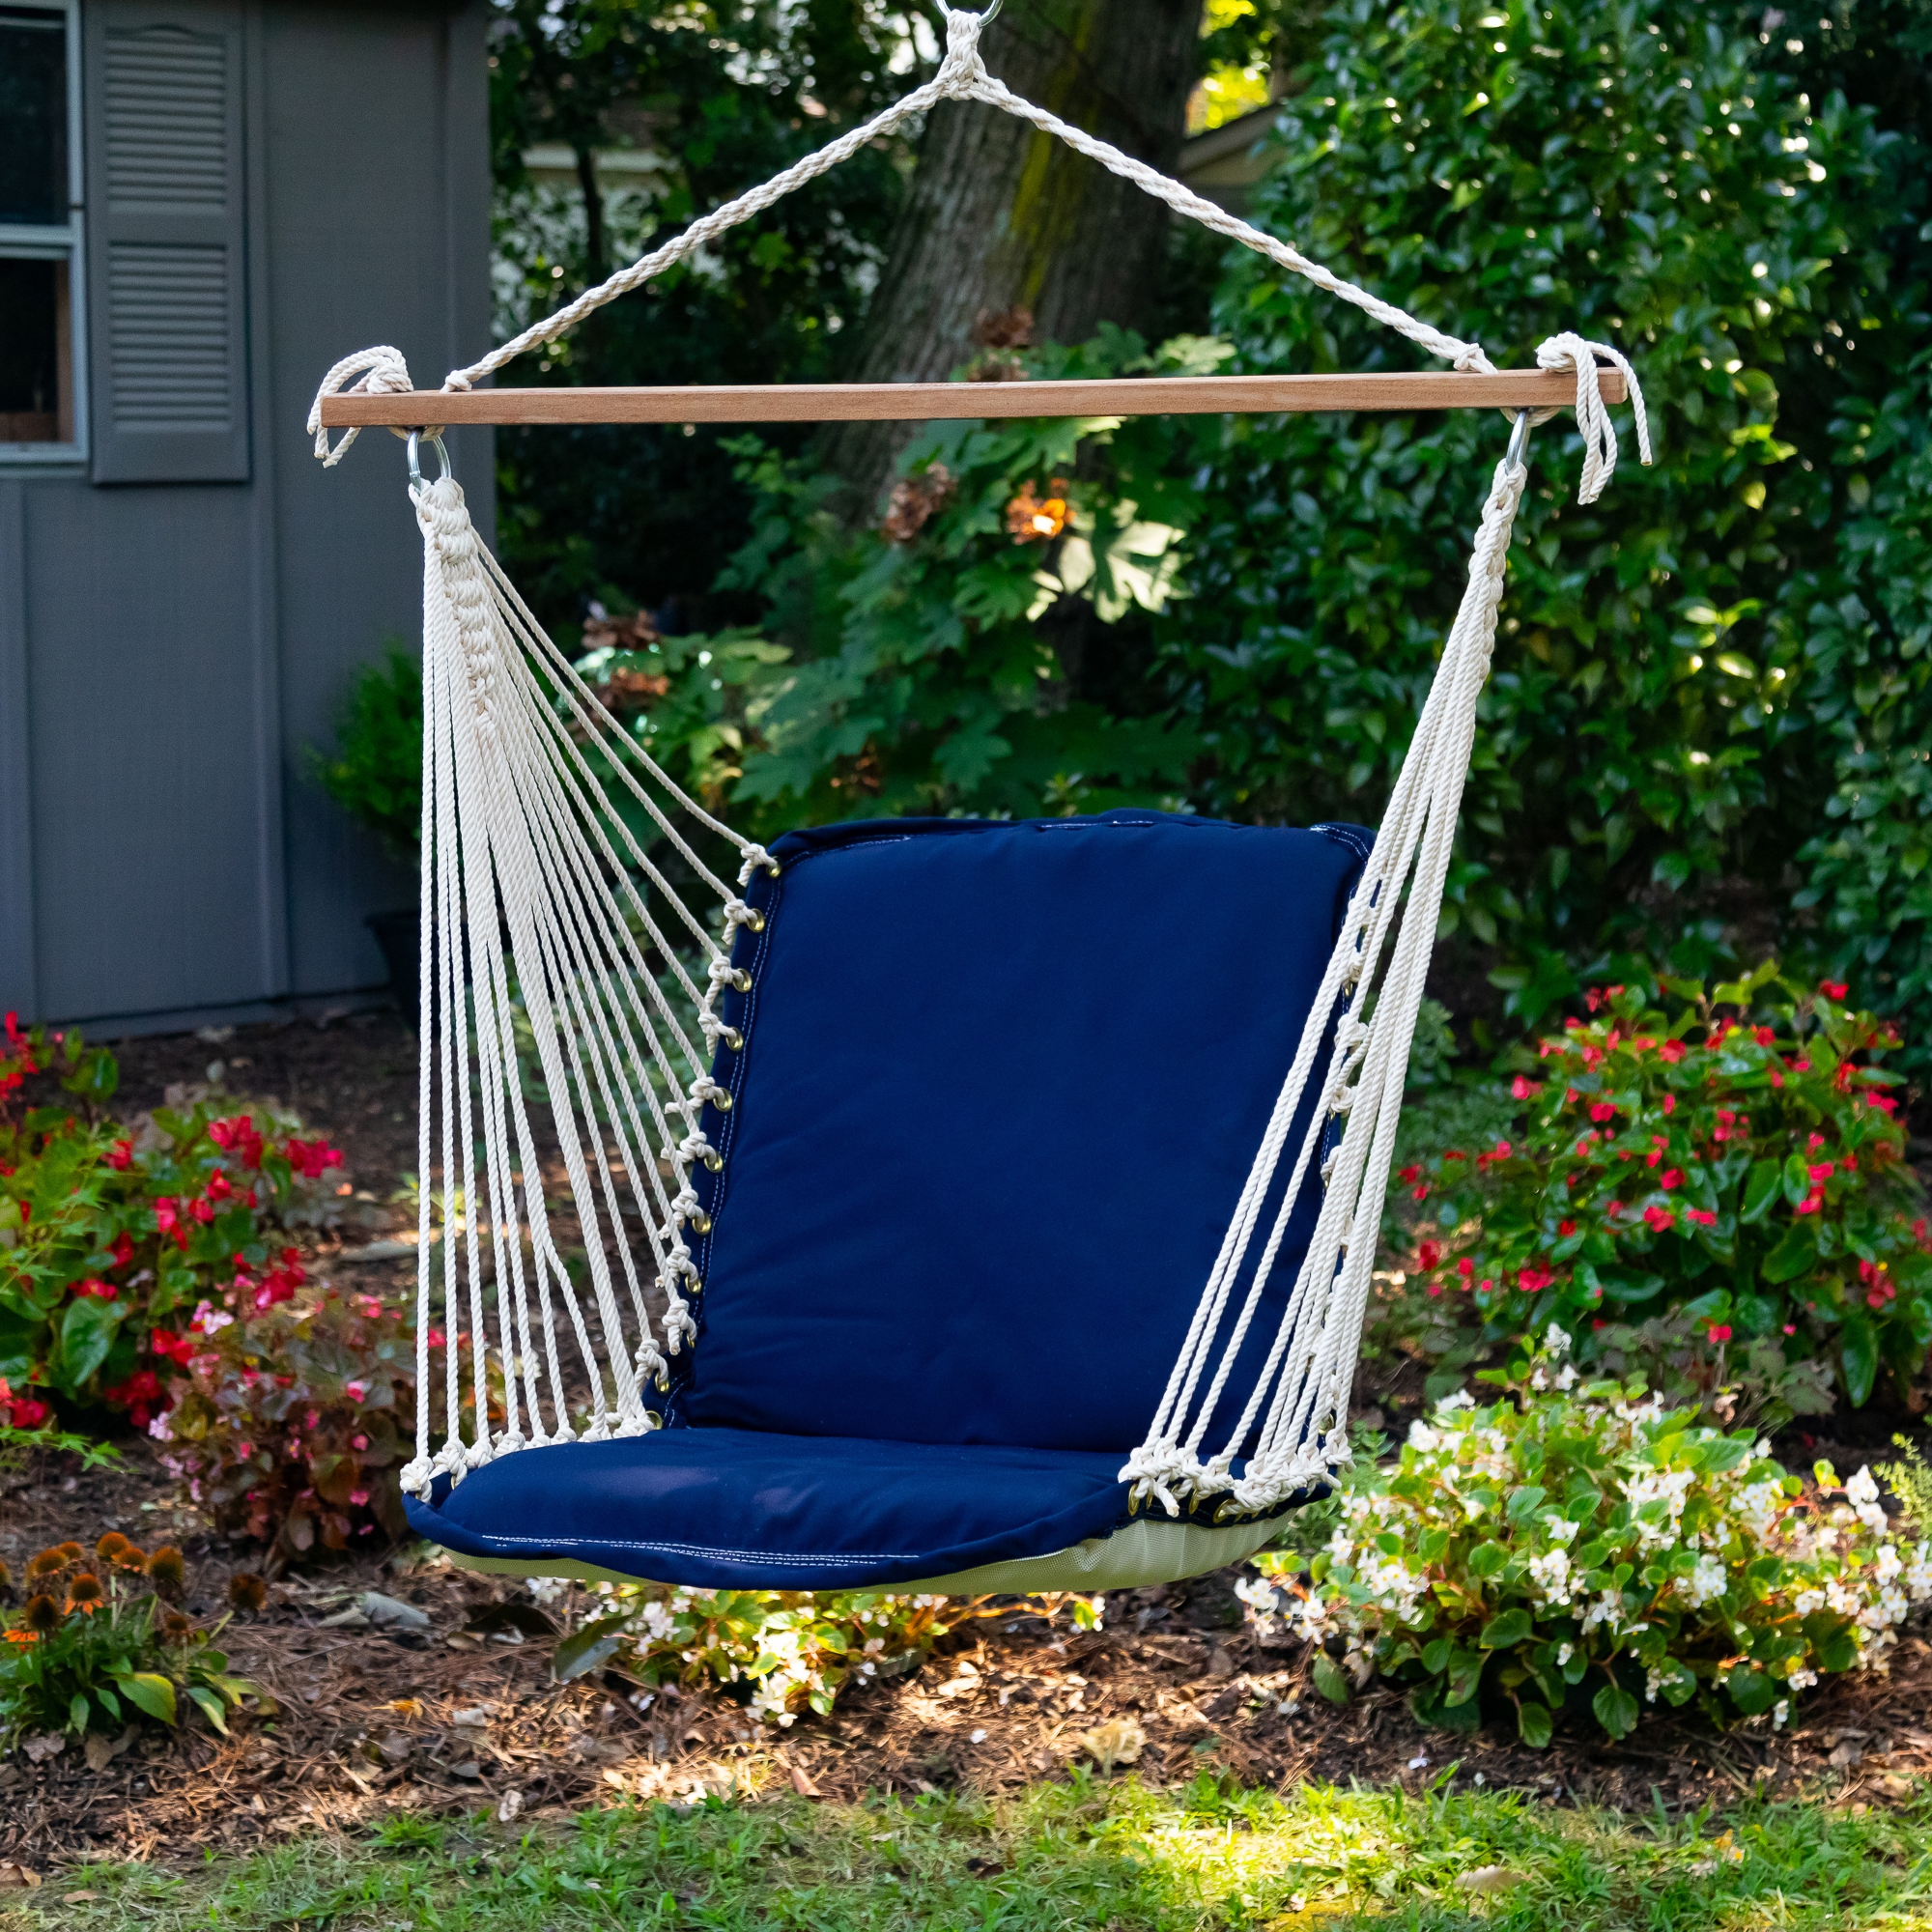 Hang loose with Nags Head Hammocks Sunbrella® & DuraCord® Quilted